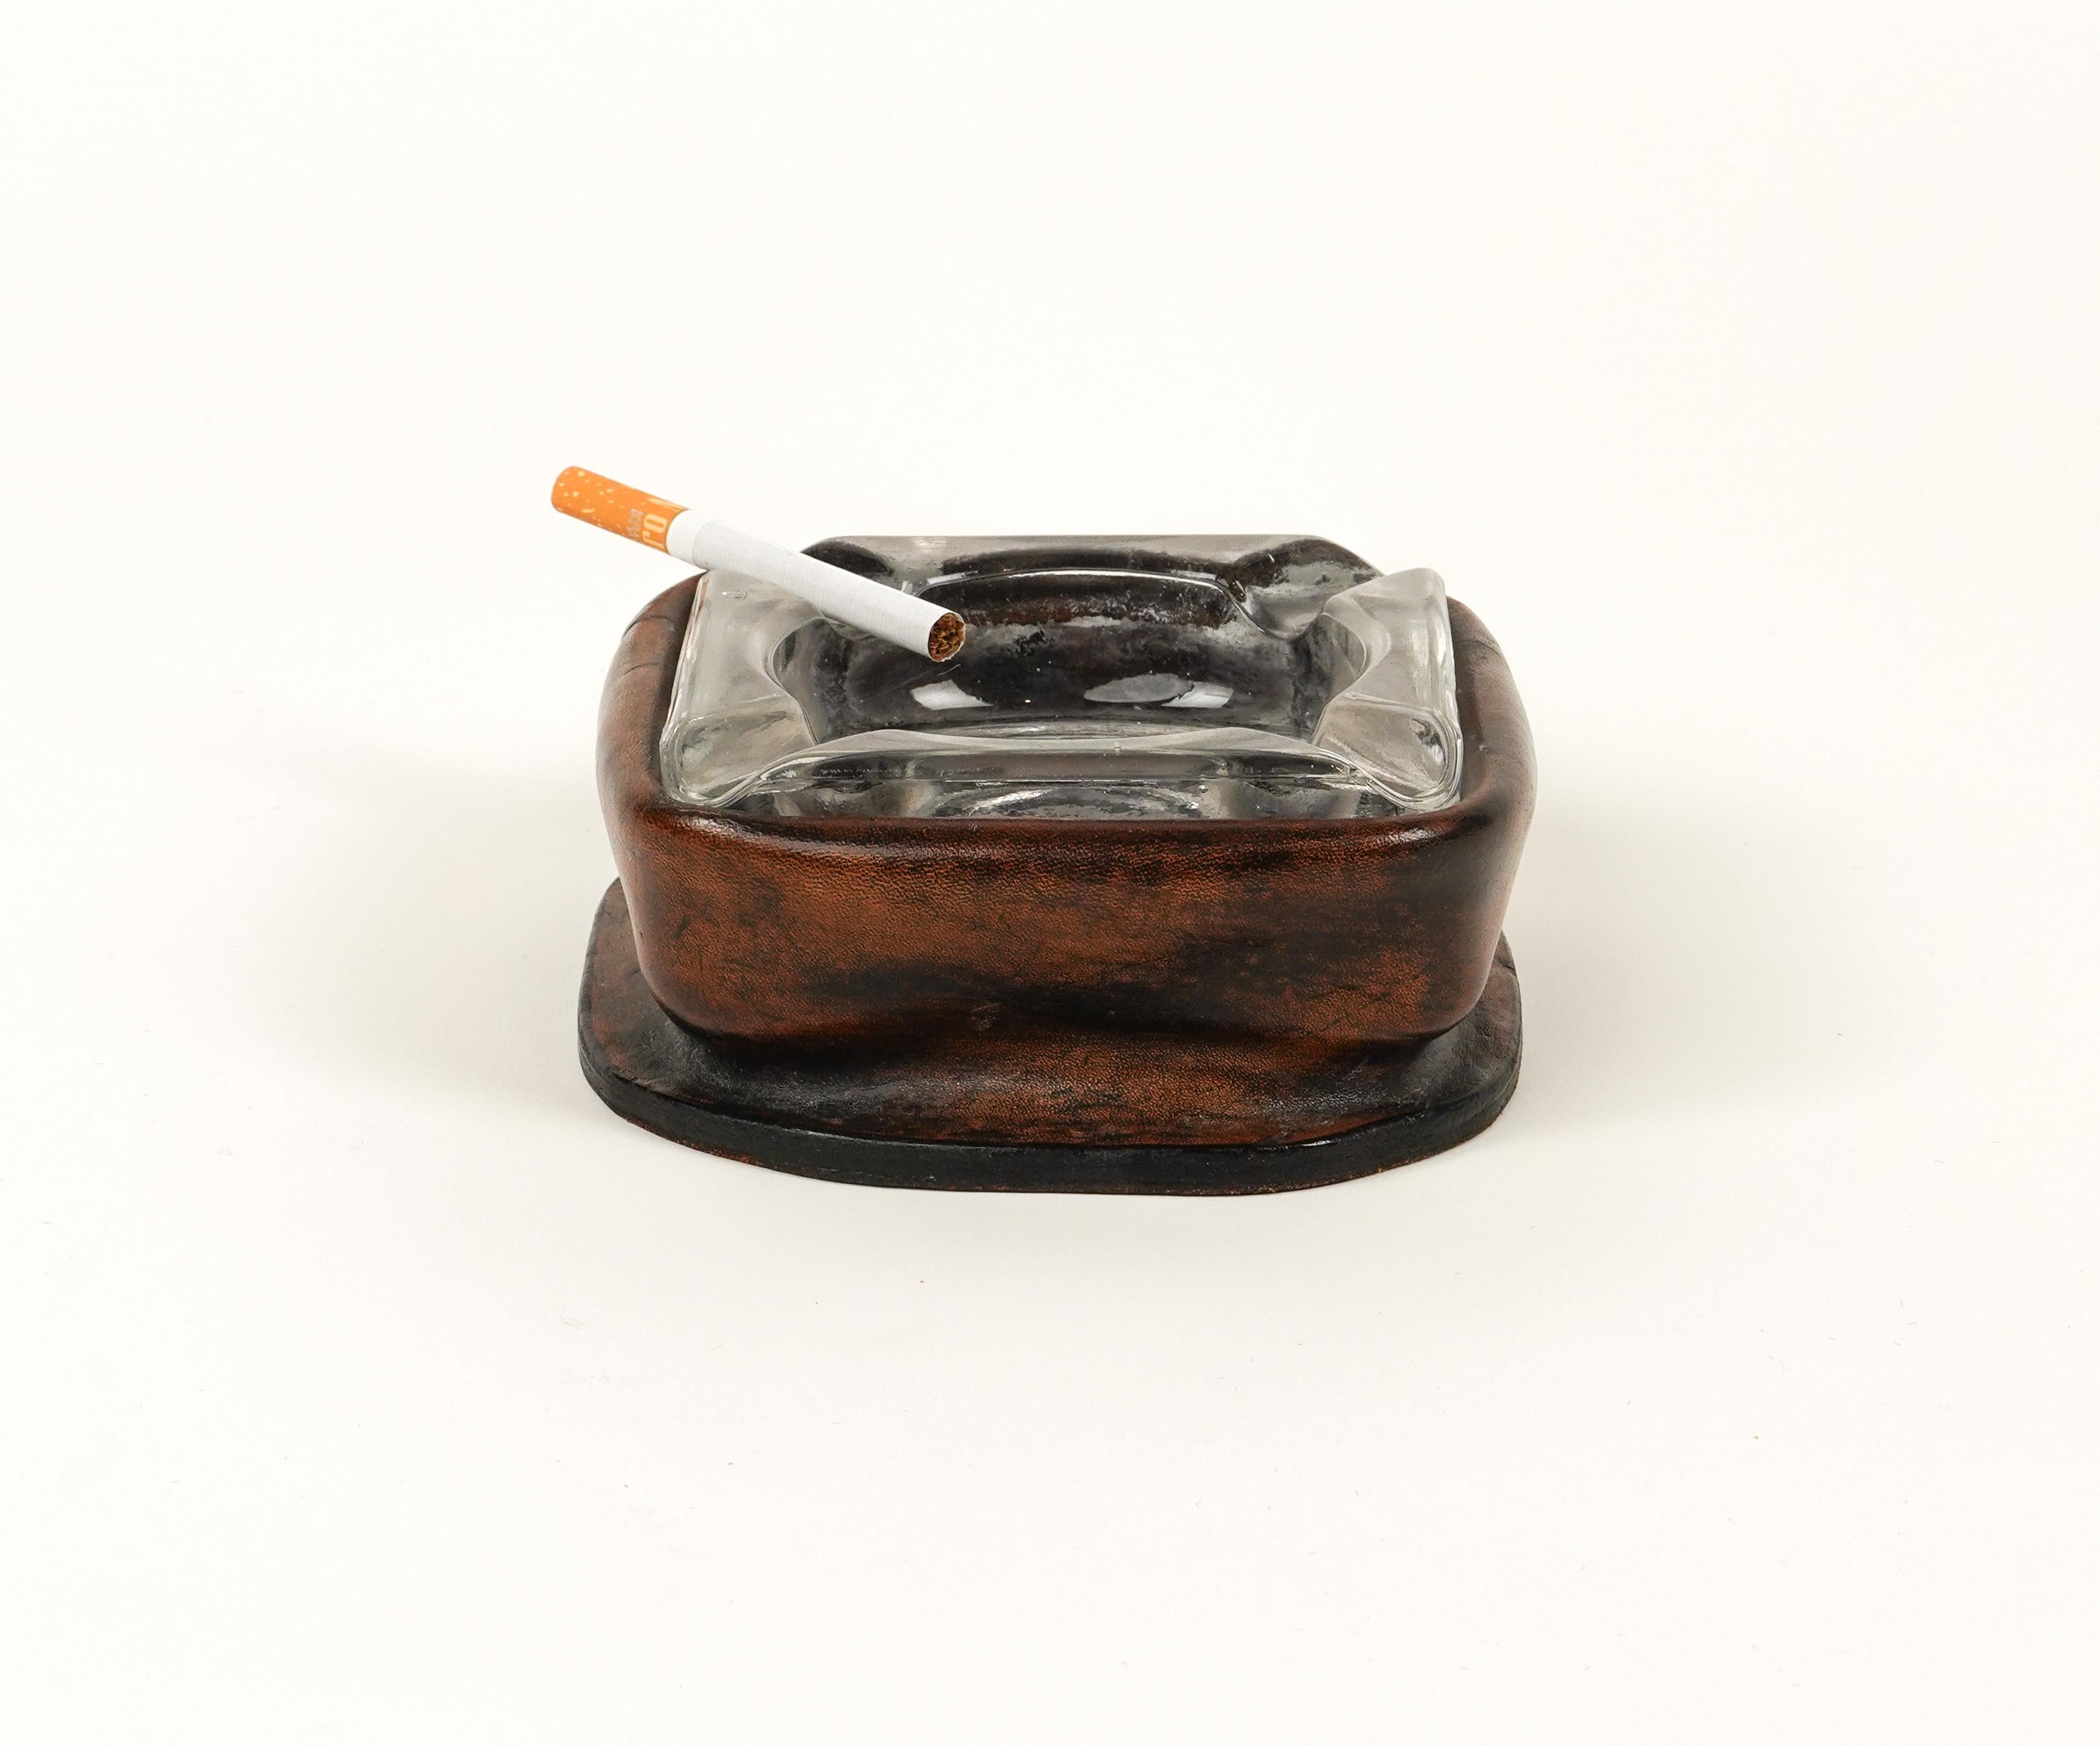 Midcentury Squared Ashtray in Leather and Glass Jacques Adnet Style, Italy 1970s For Sale 8